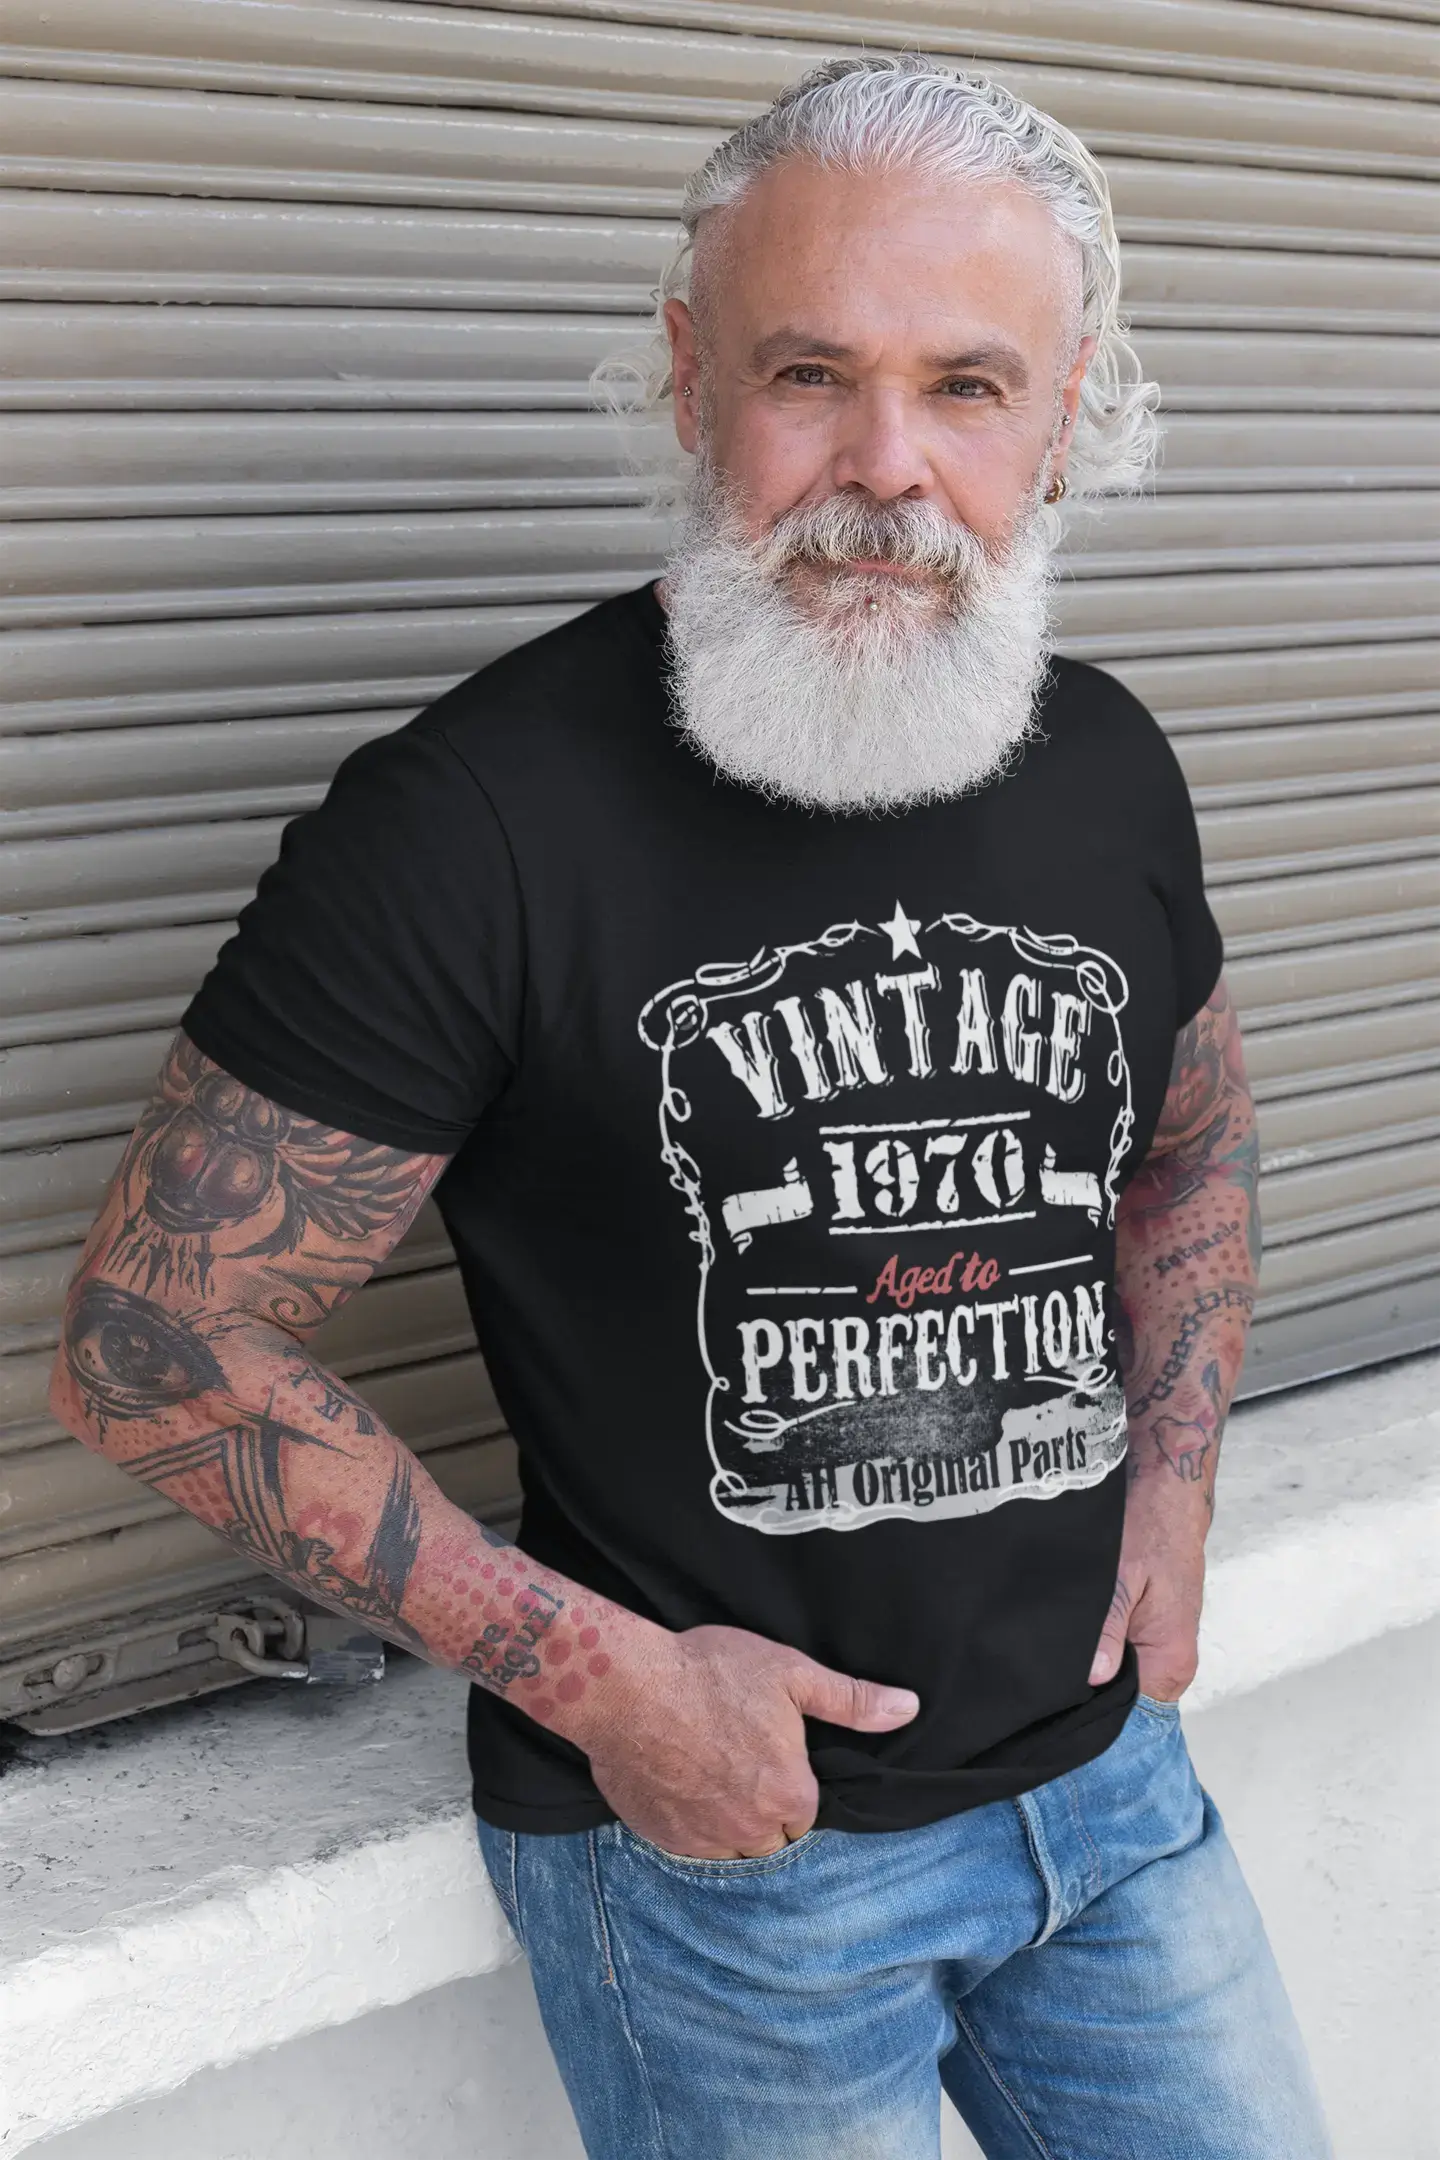 1970 Vintage Aged to Perfection Men's T-shirt Black Birthday Gift 00490